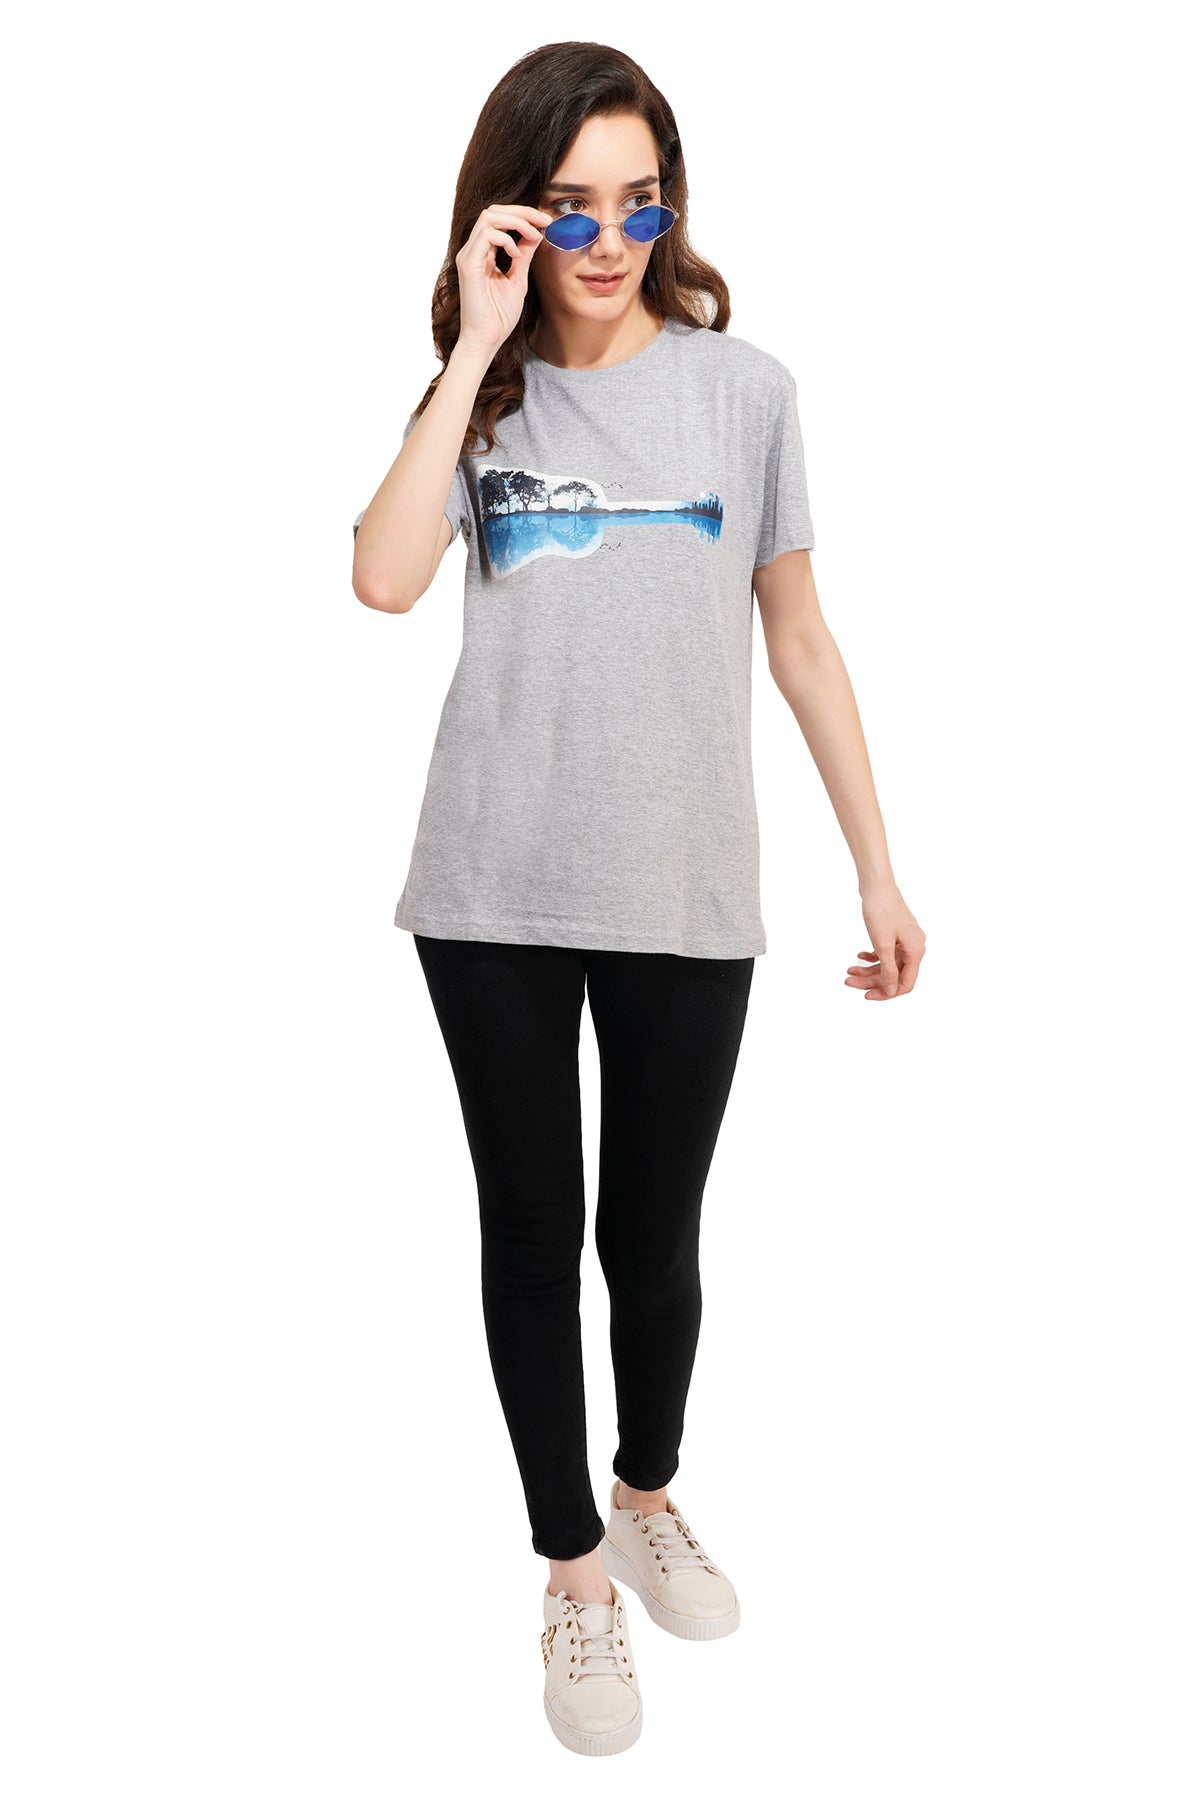 Women Heather Grey refection Lake t-shirt SNAZZYNSUAVE – Guitar